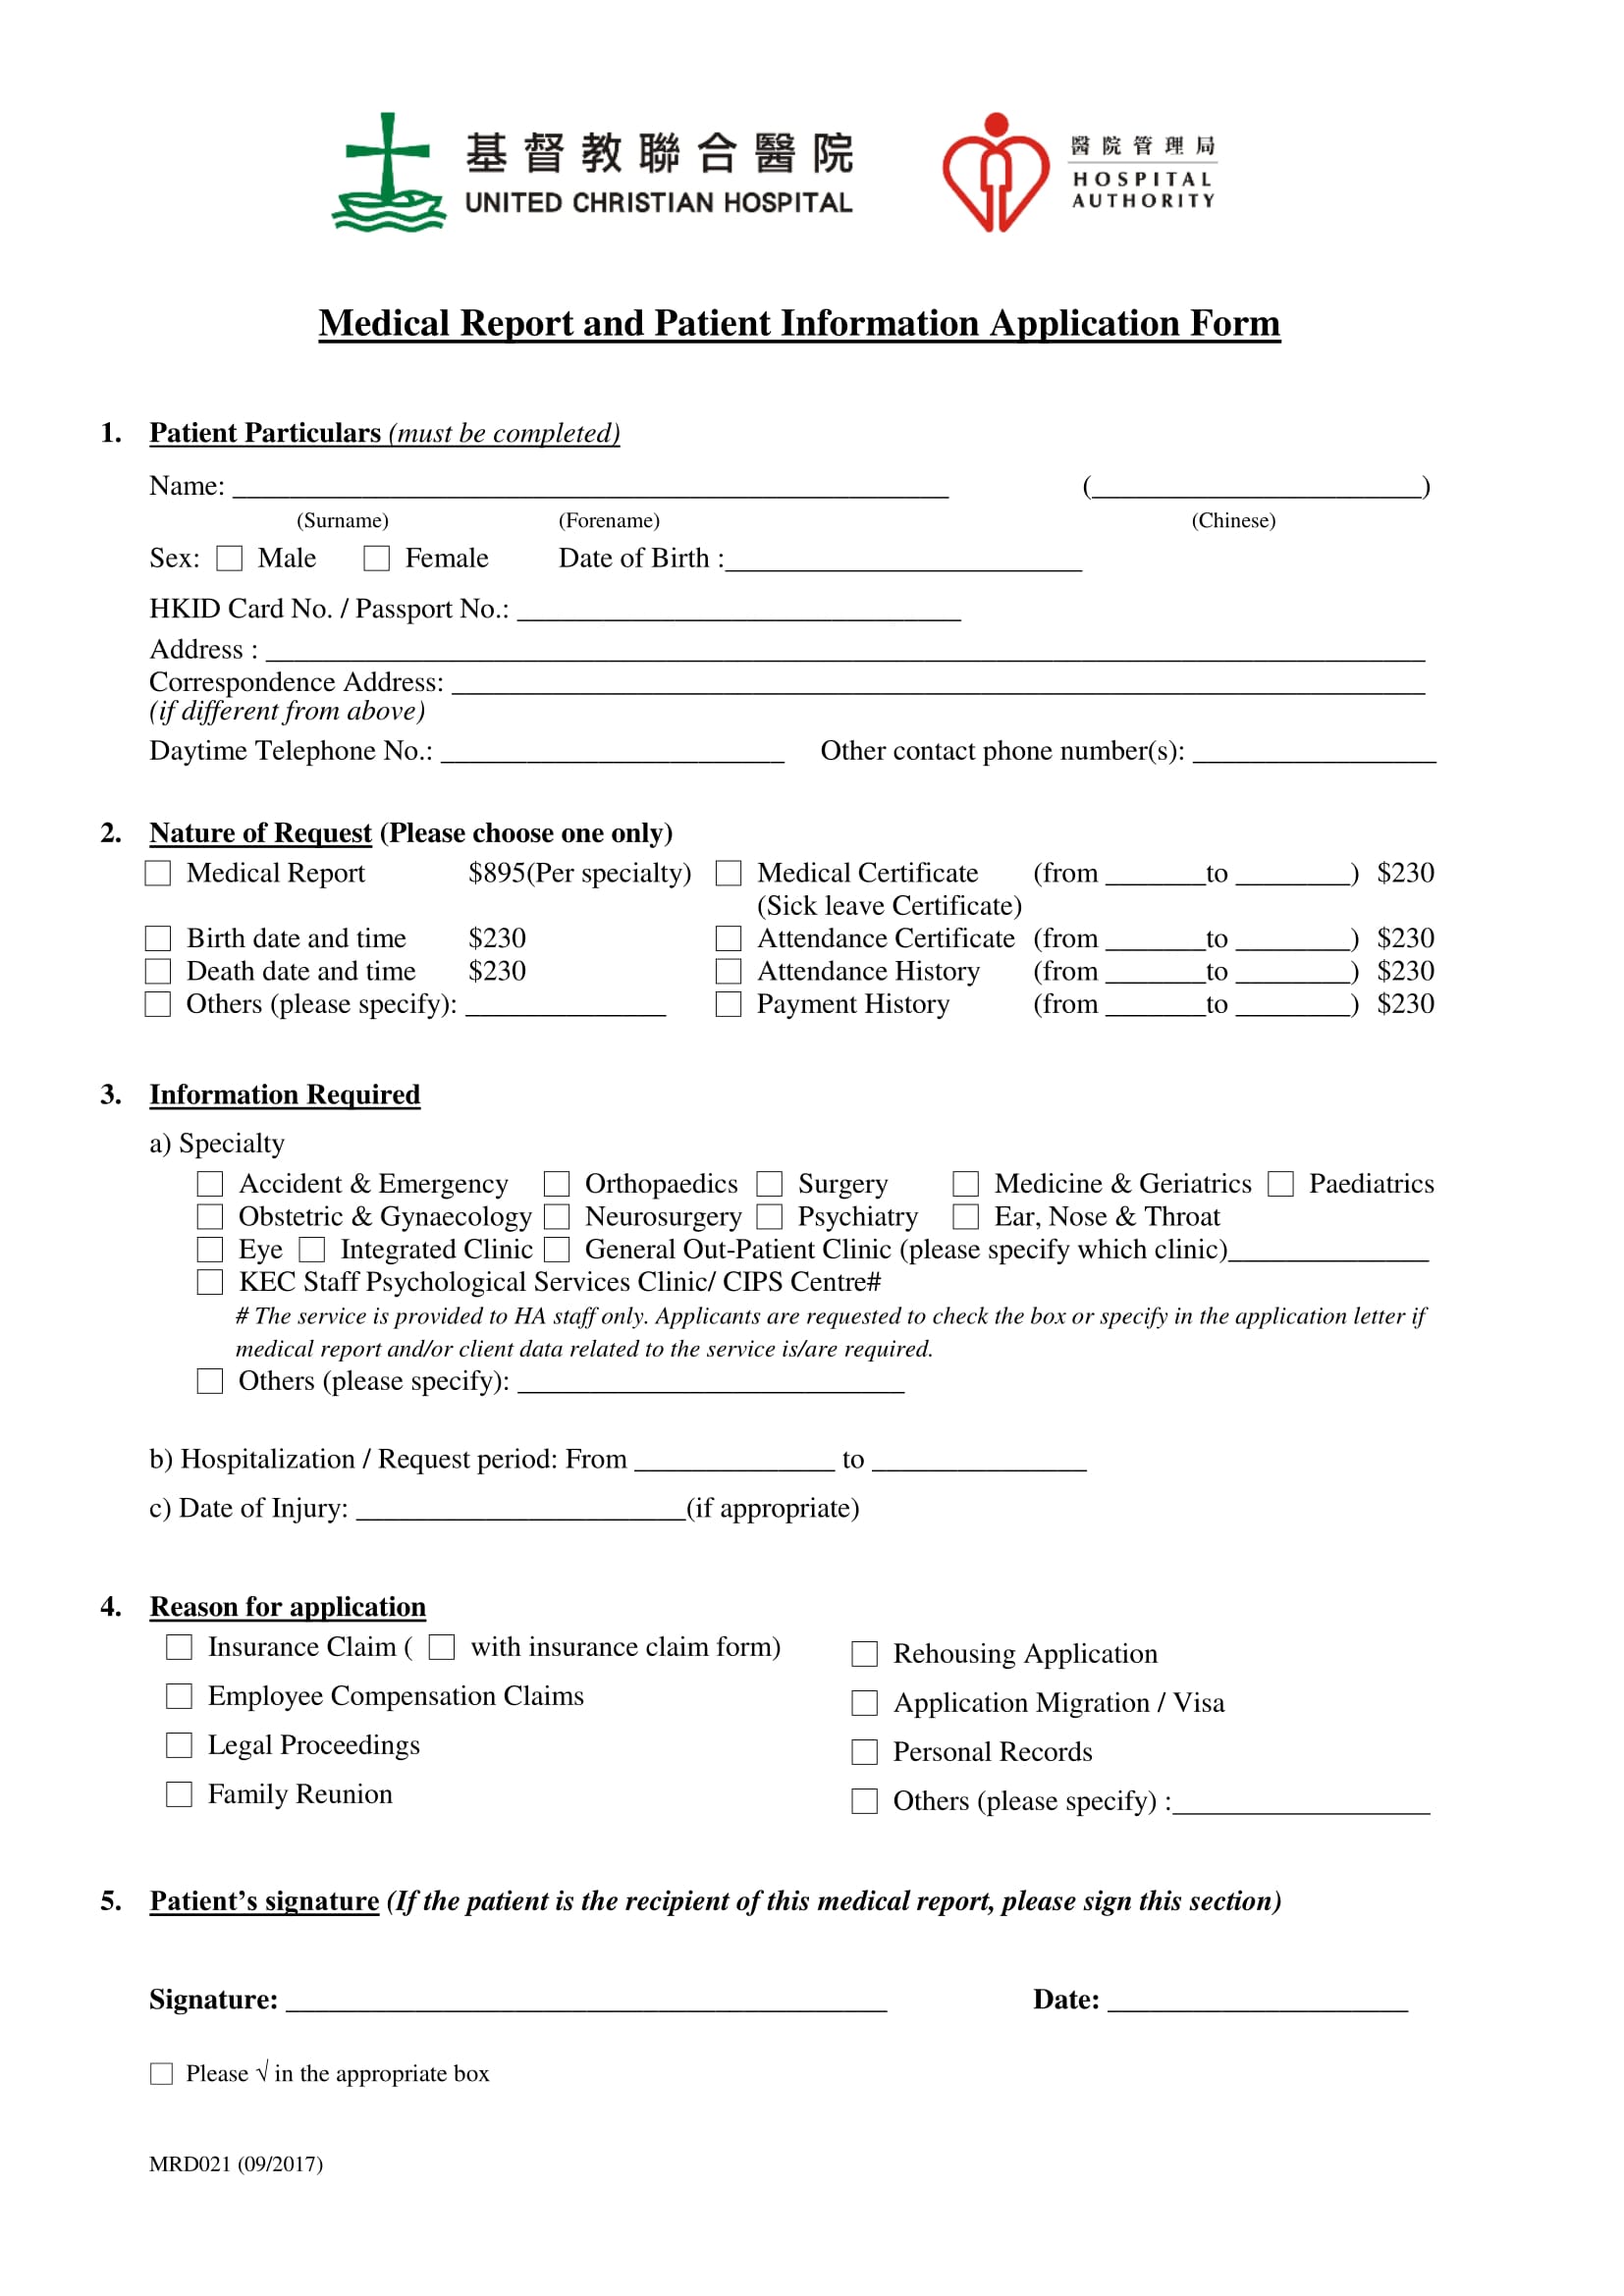 request for patient’s medical report form 1